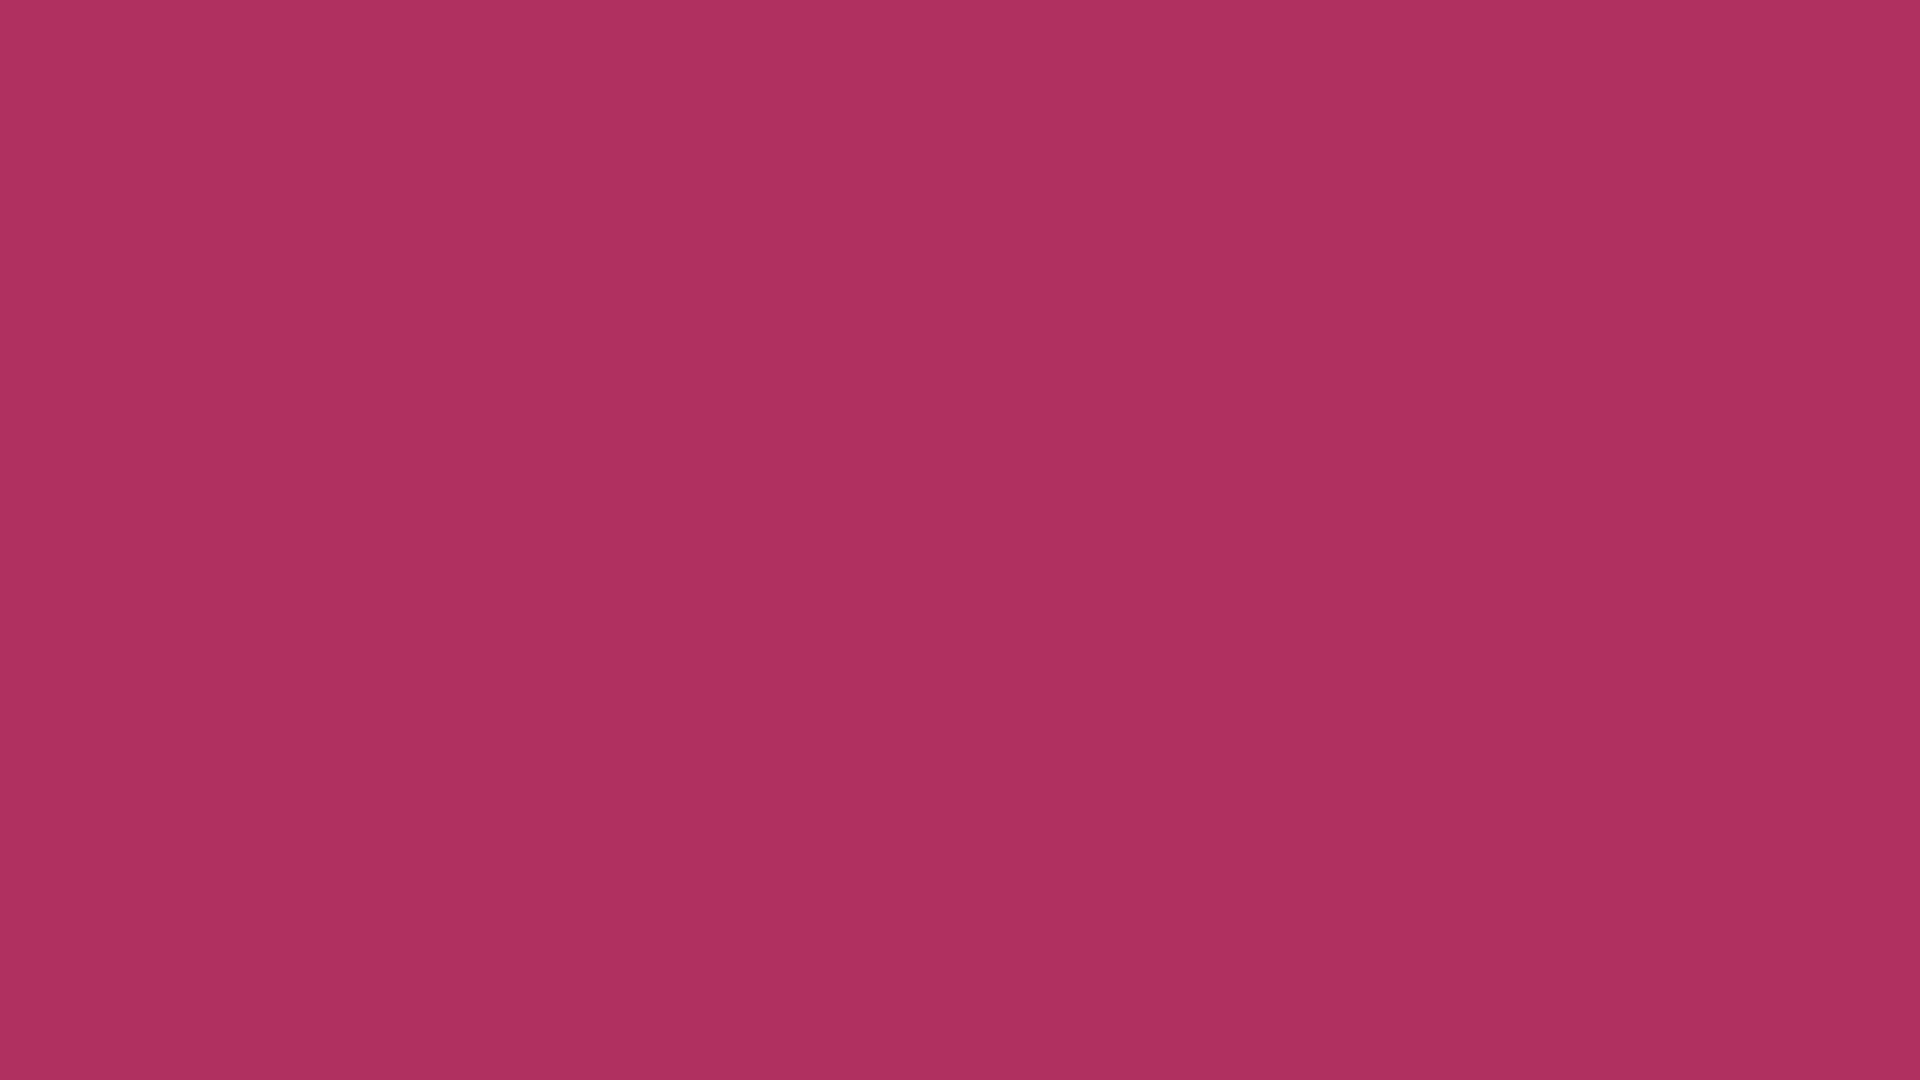 1920x1080 Rich Maroon Solid Color Background